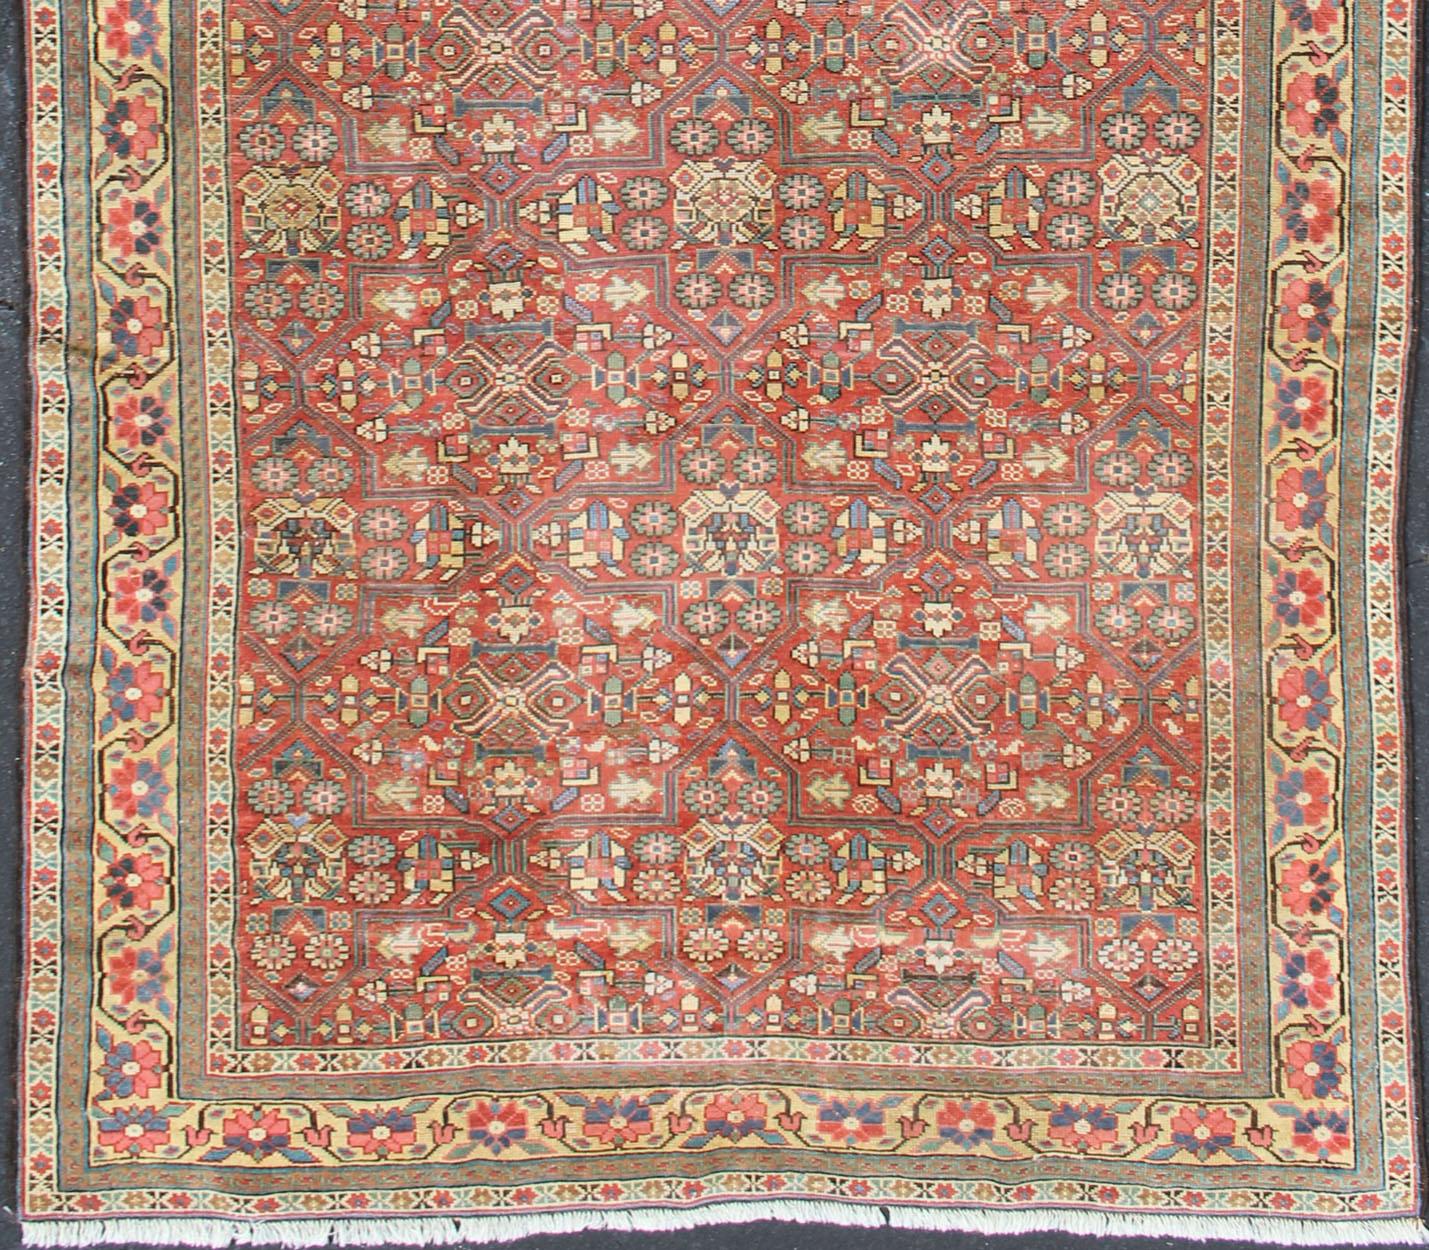 Geometric design antique Kurdish Gallery runner, rug / L11-0301. Kurdish Gallery rug
This antique Kurdish Gallery piece features an intricate and geometric pattern, with colors ranging from soft rusty red, gorgeous blues, pale green, yellow, cream